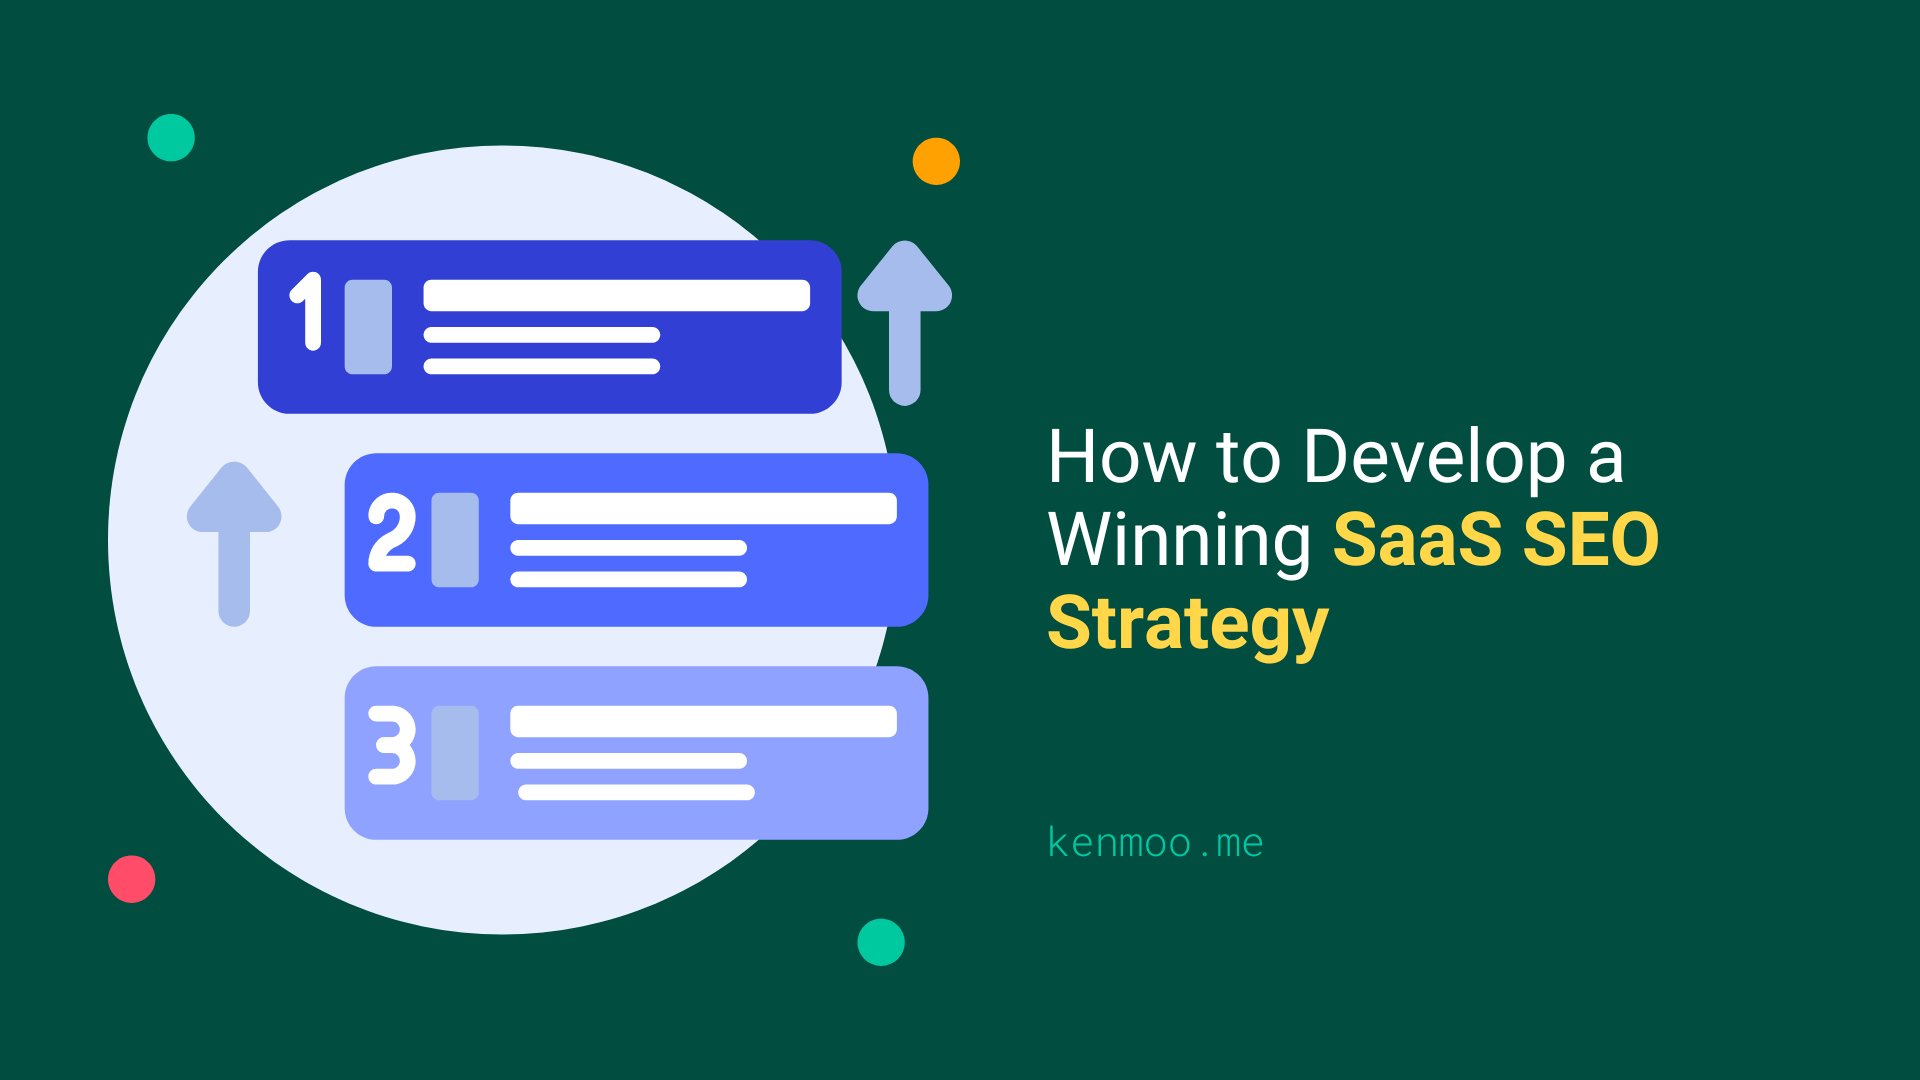 How to Develop a Winning SaaS SEO Strategy